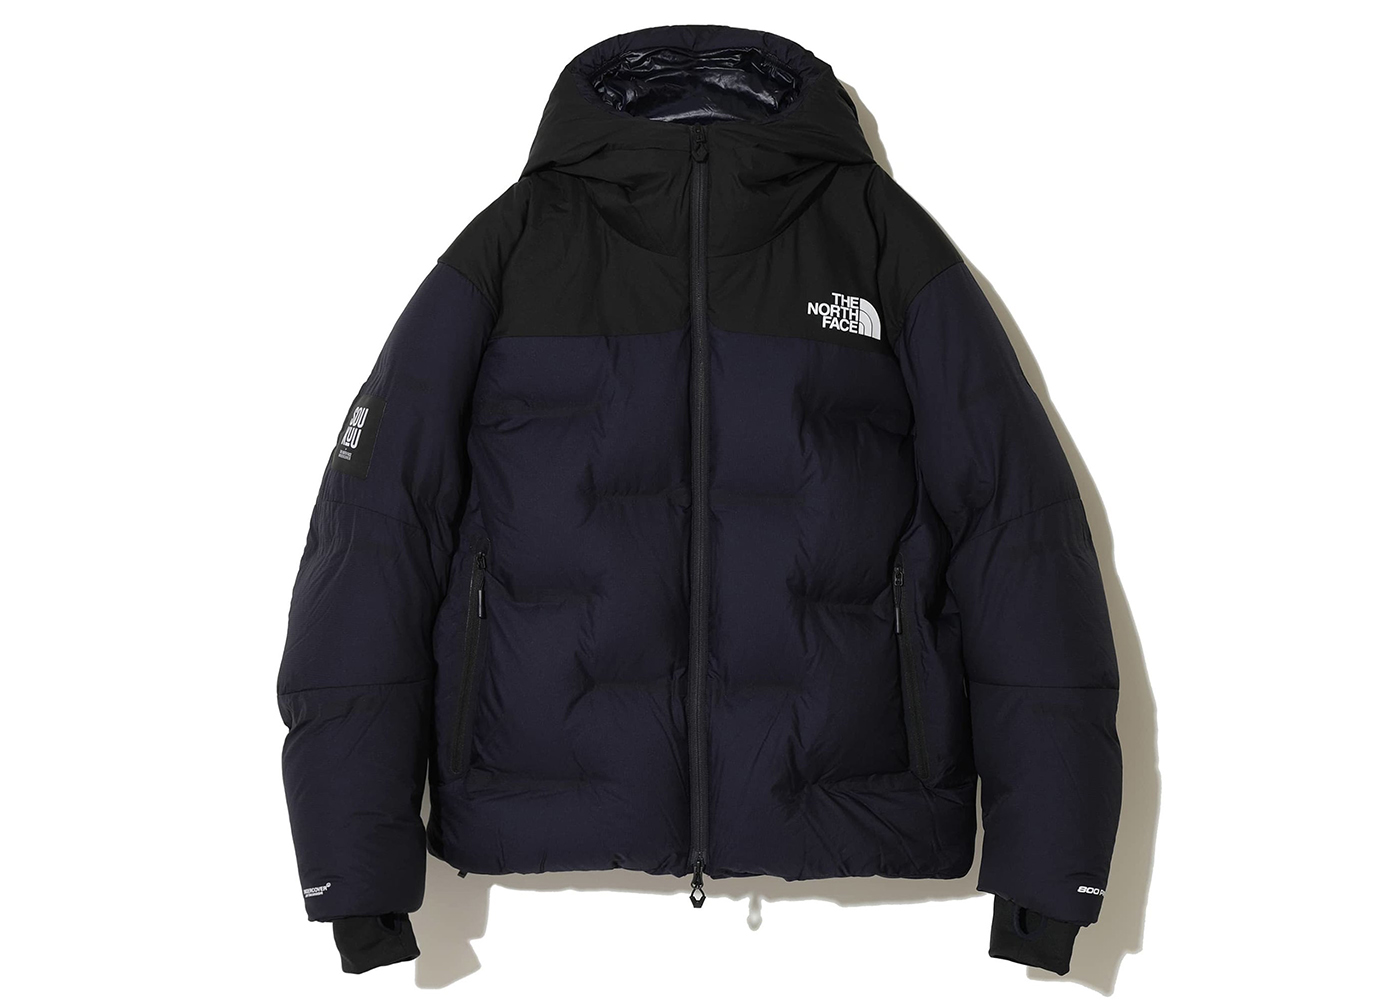 UNDERCOVER x THE NORTH FACE SOUKUUTシャツ/カットソー(半袖/袖なし)